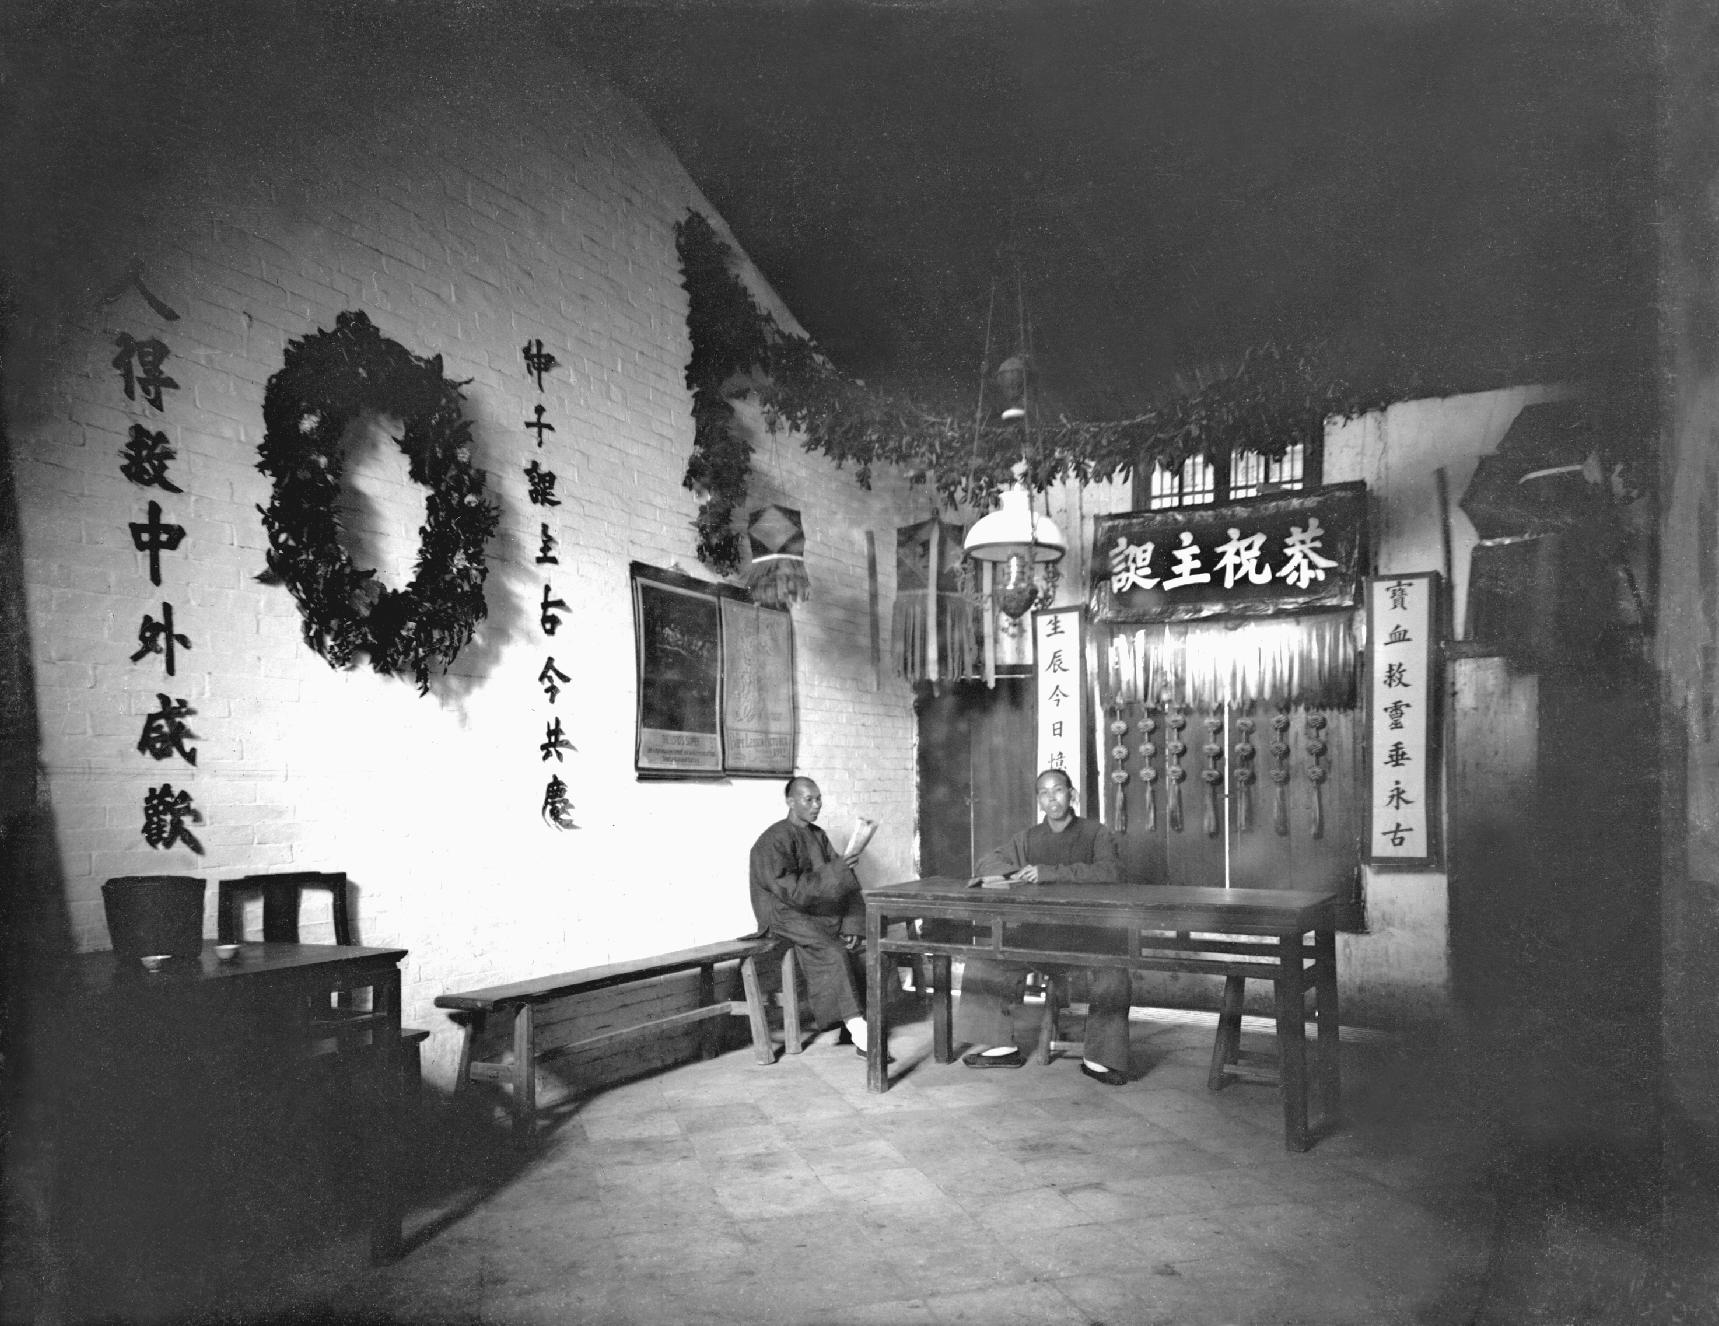 Doctor Patton and an elder, inside the old chapel at Yeungkong 陽江.